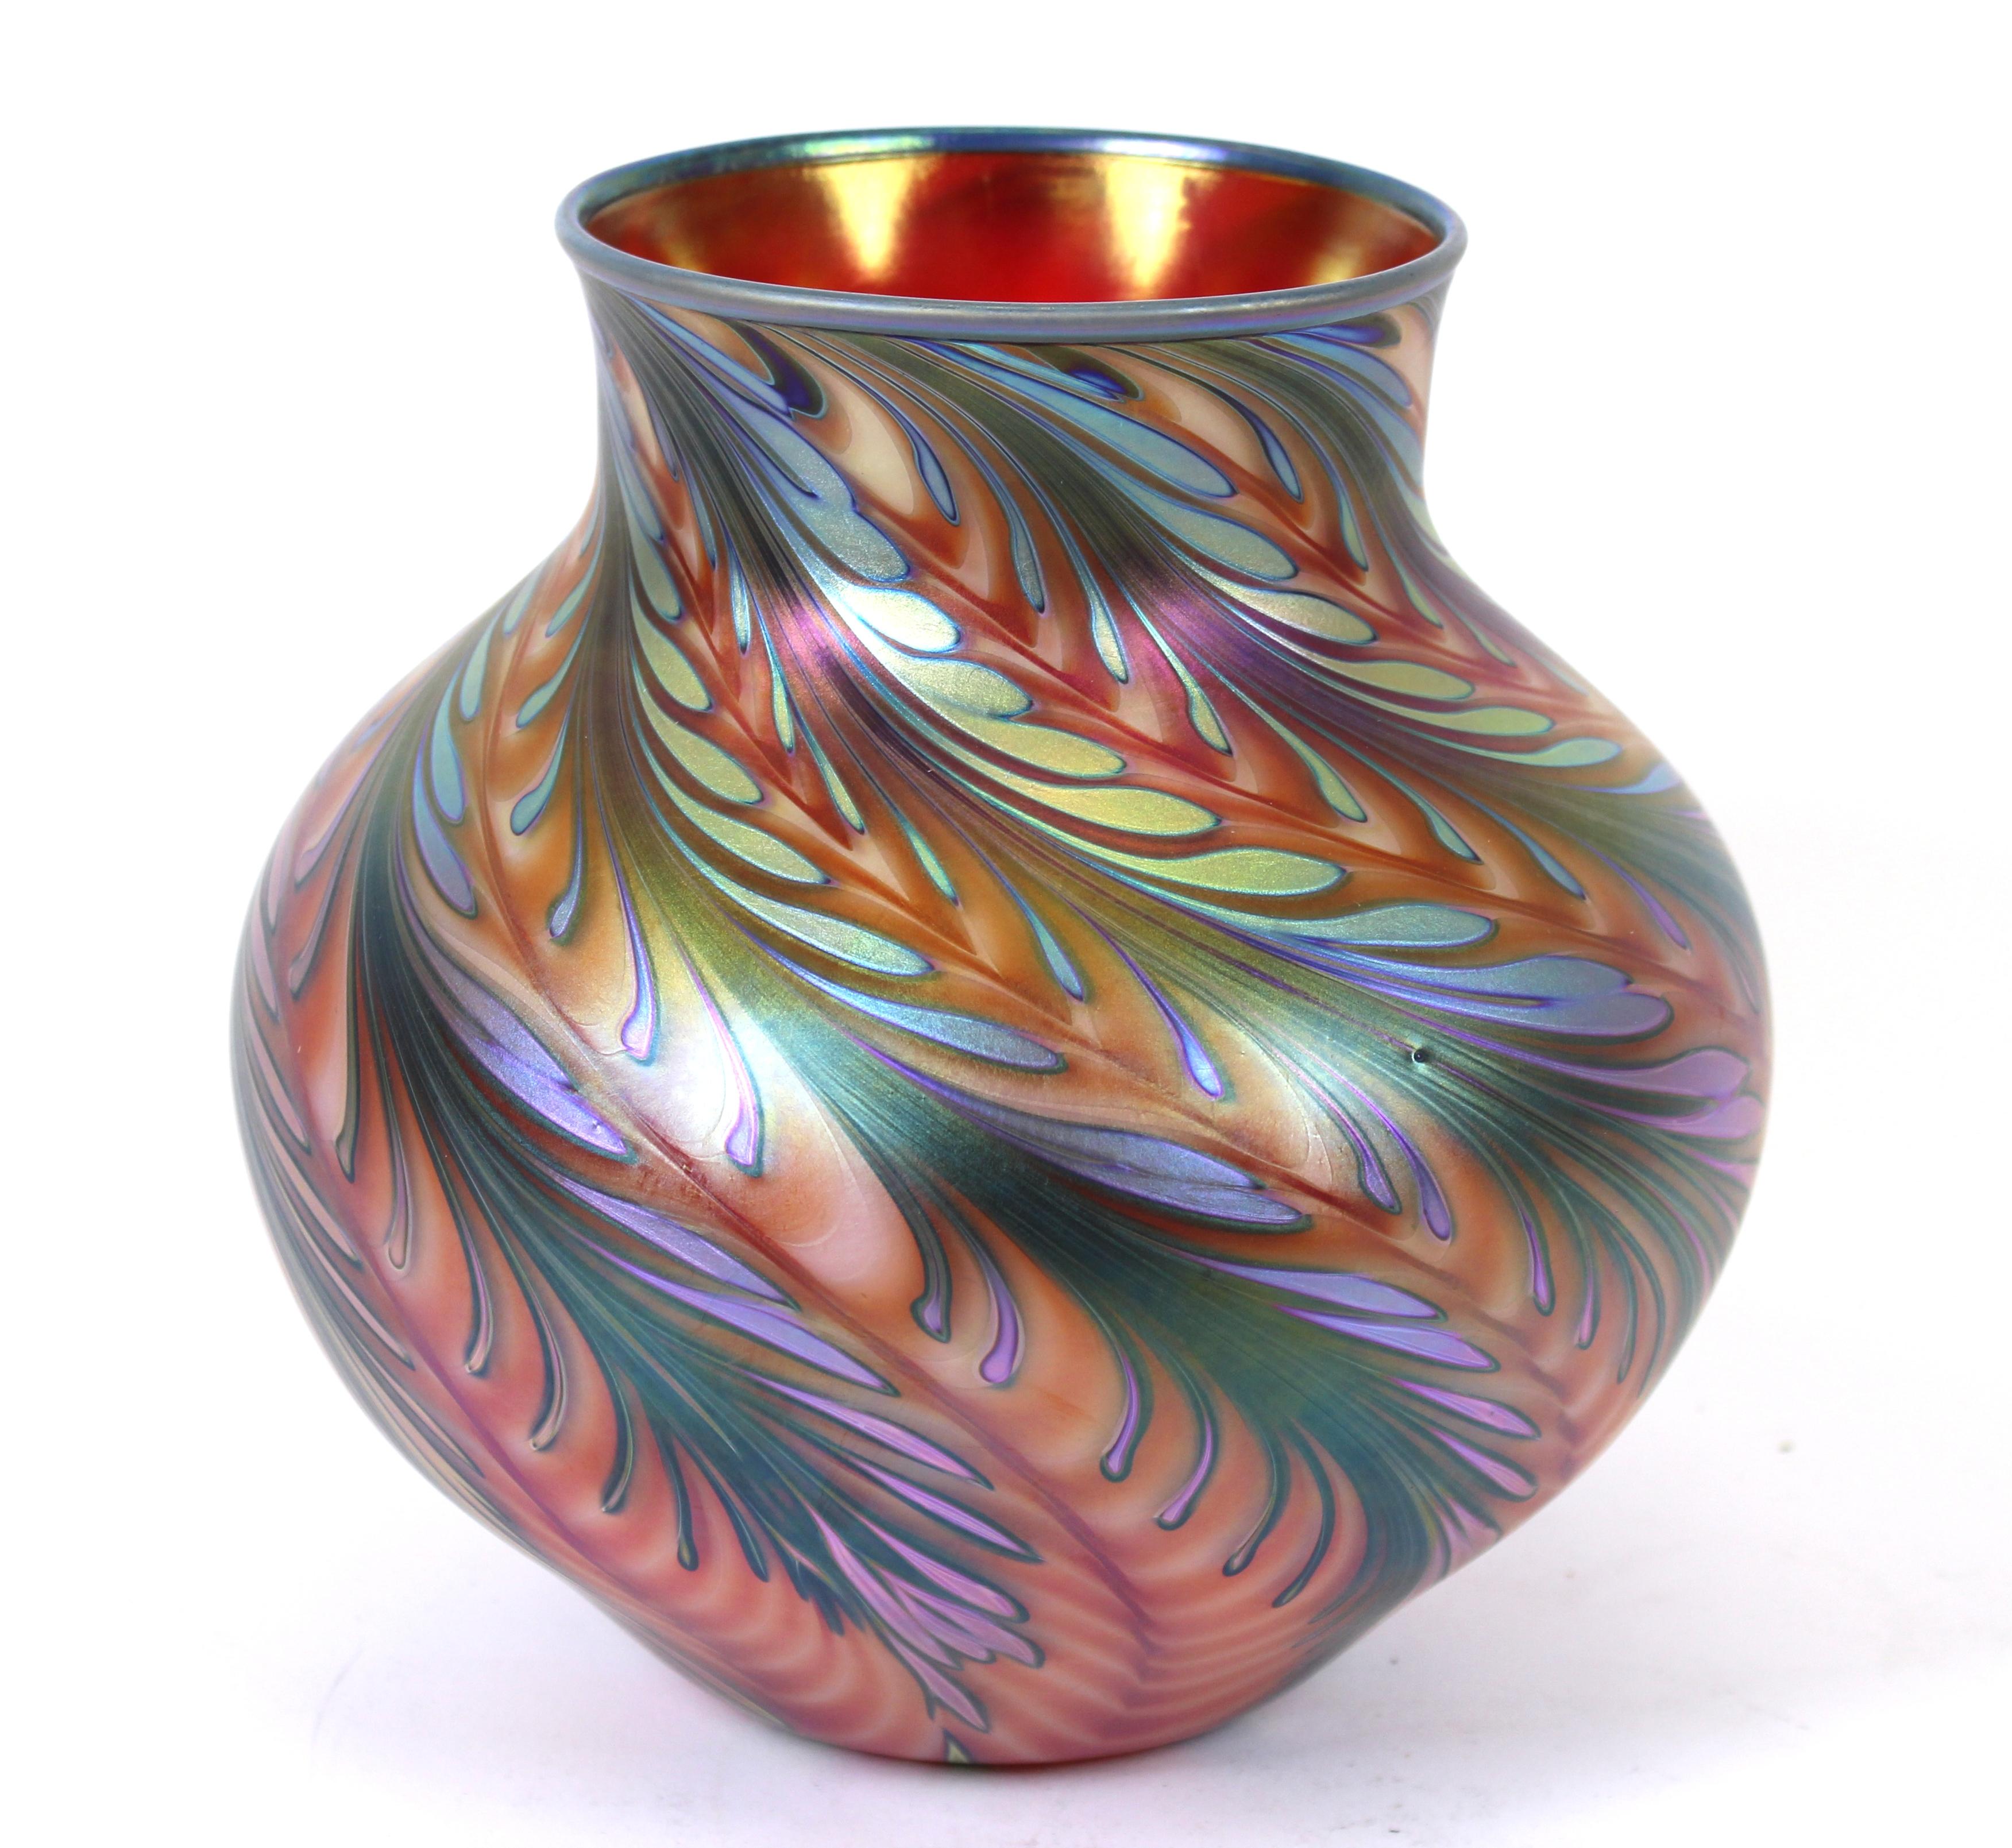 Charles Lotton modern art glass vase in iridescent colors, signed 'Charles Lotton 1994' on the base.